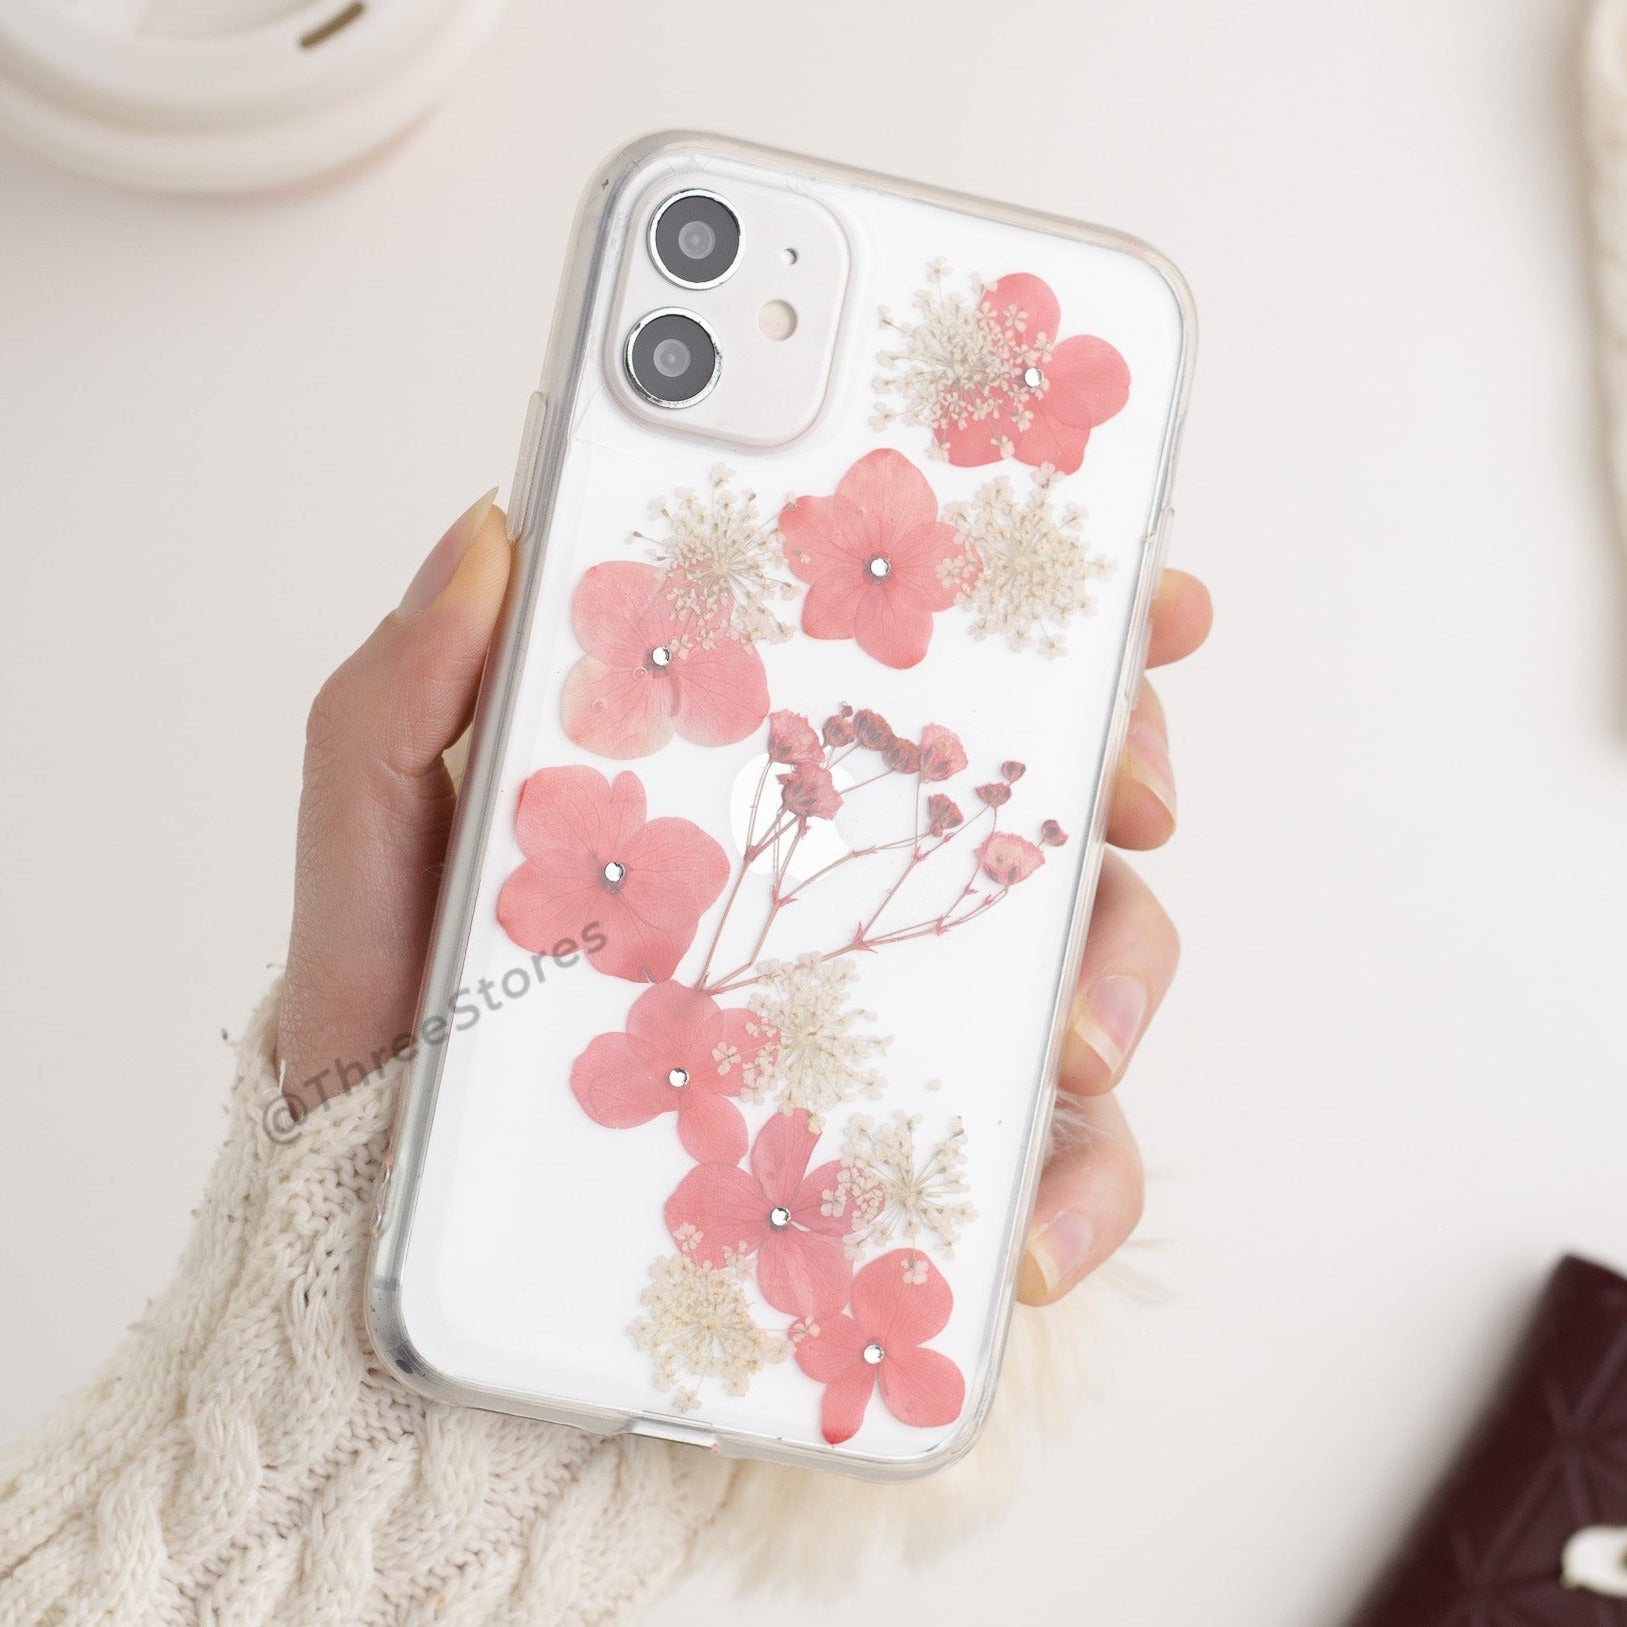 Qy Yang Flower Case iPhone 12 Pro Max Three store